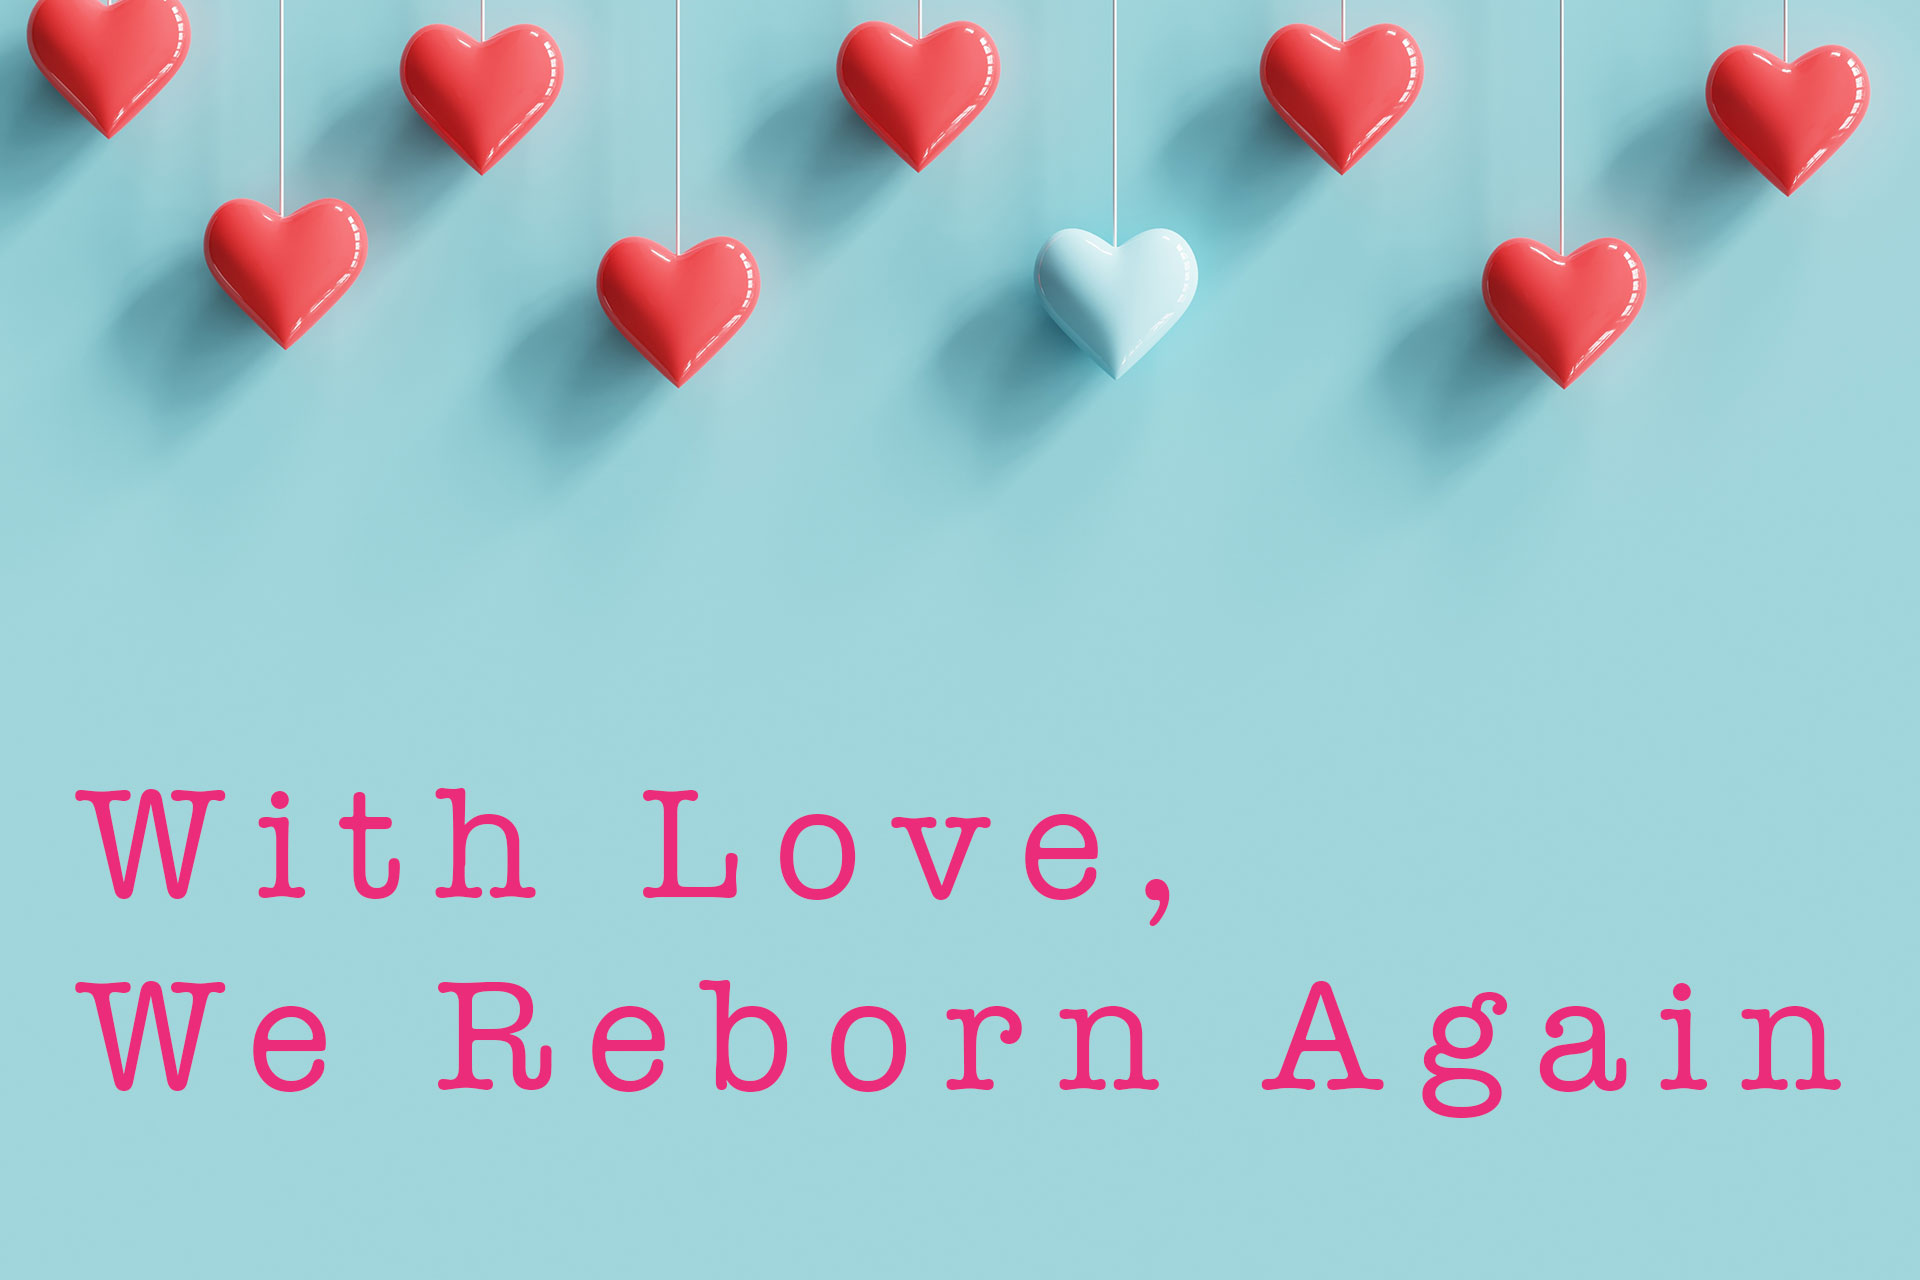 With love, we reborn again.